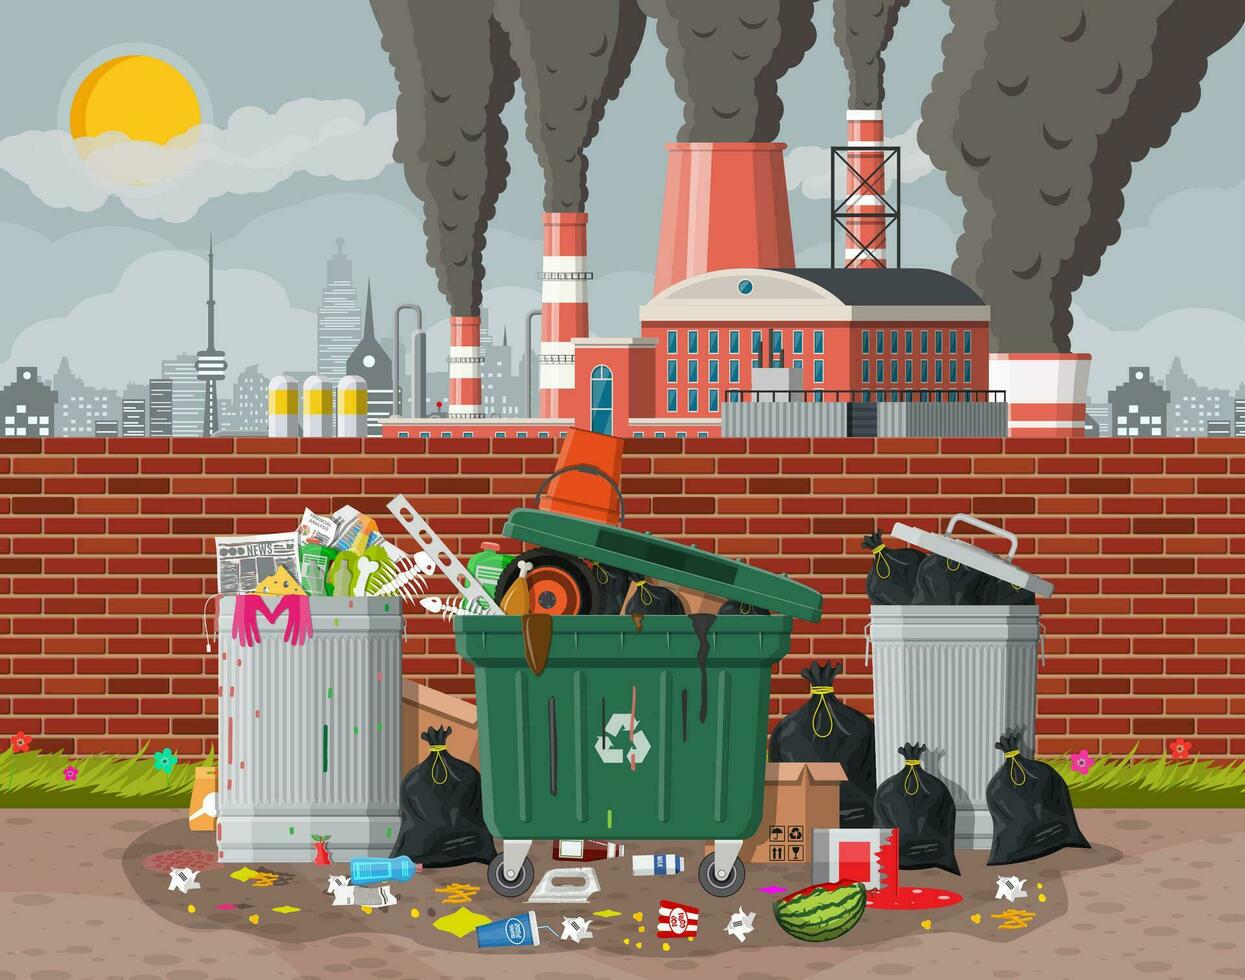 Plant smoking pipes. Smog in city. Trash emission from factory. Grey sky polluted trees grass. Garbage bin full of trash. Environmental pollution ecology nature. Vector illustration flat style